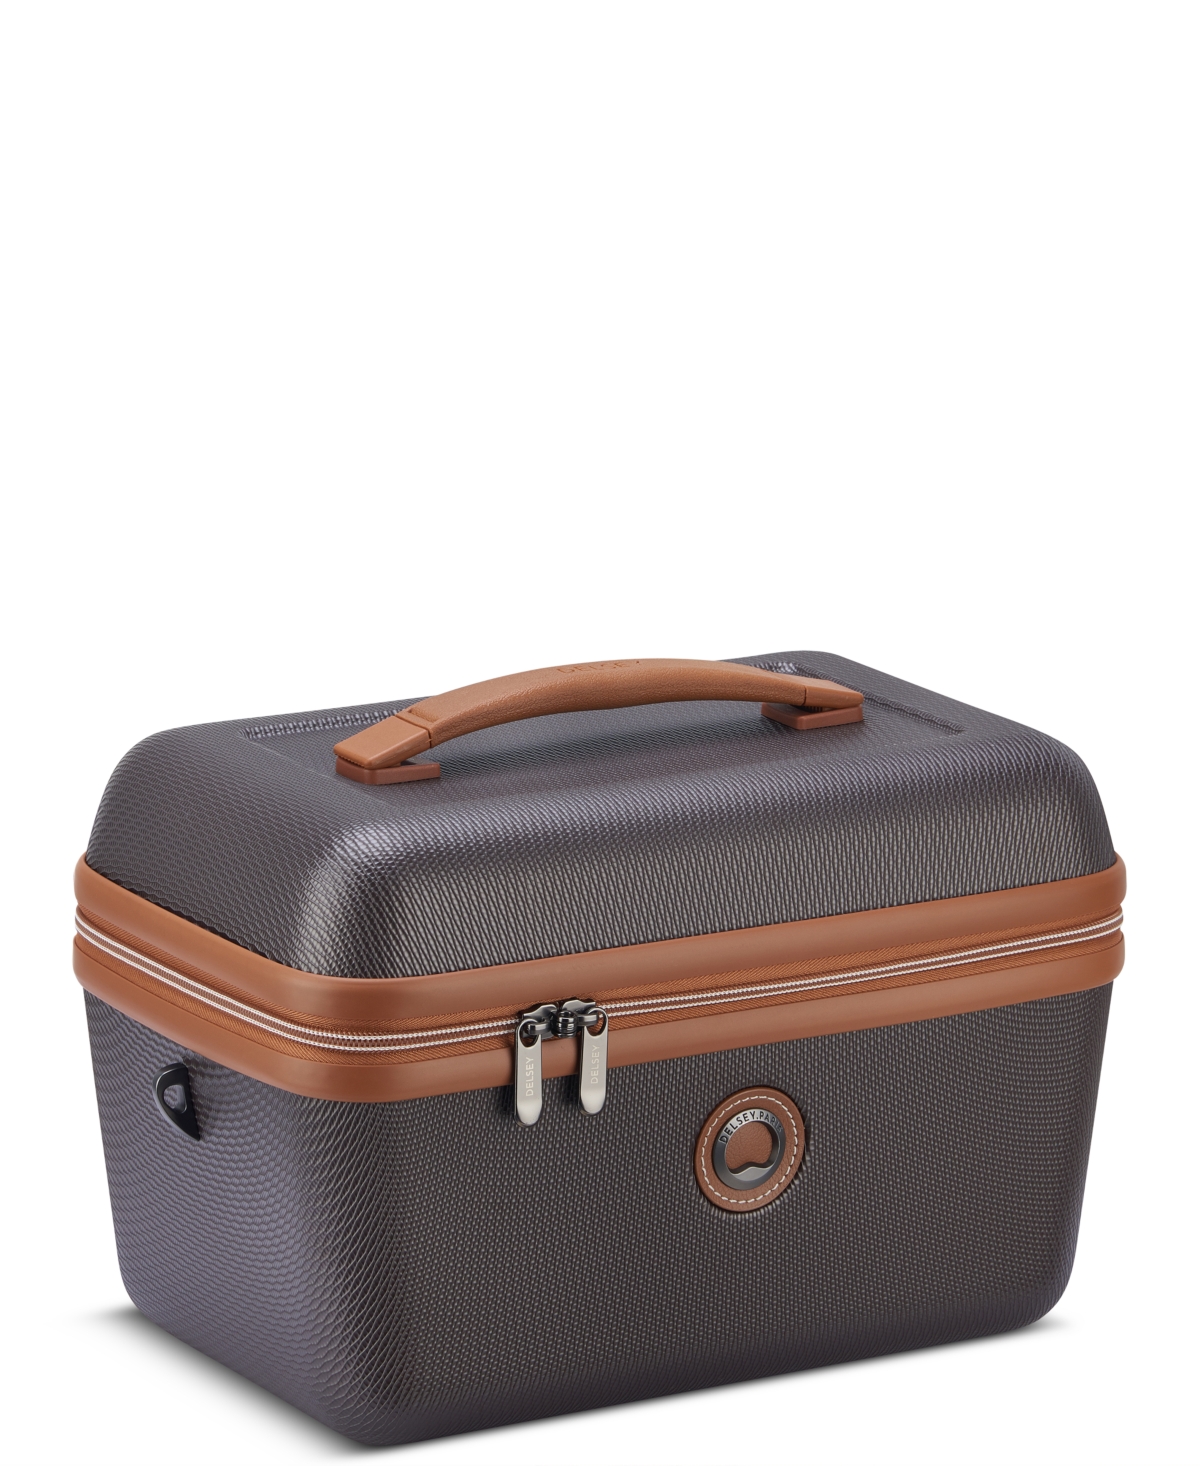 Chatelet Air 2.0 Beauty Case - Chocolate